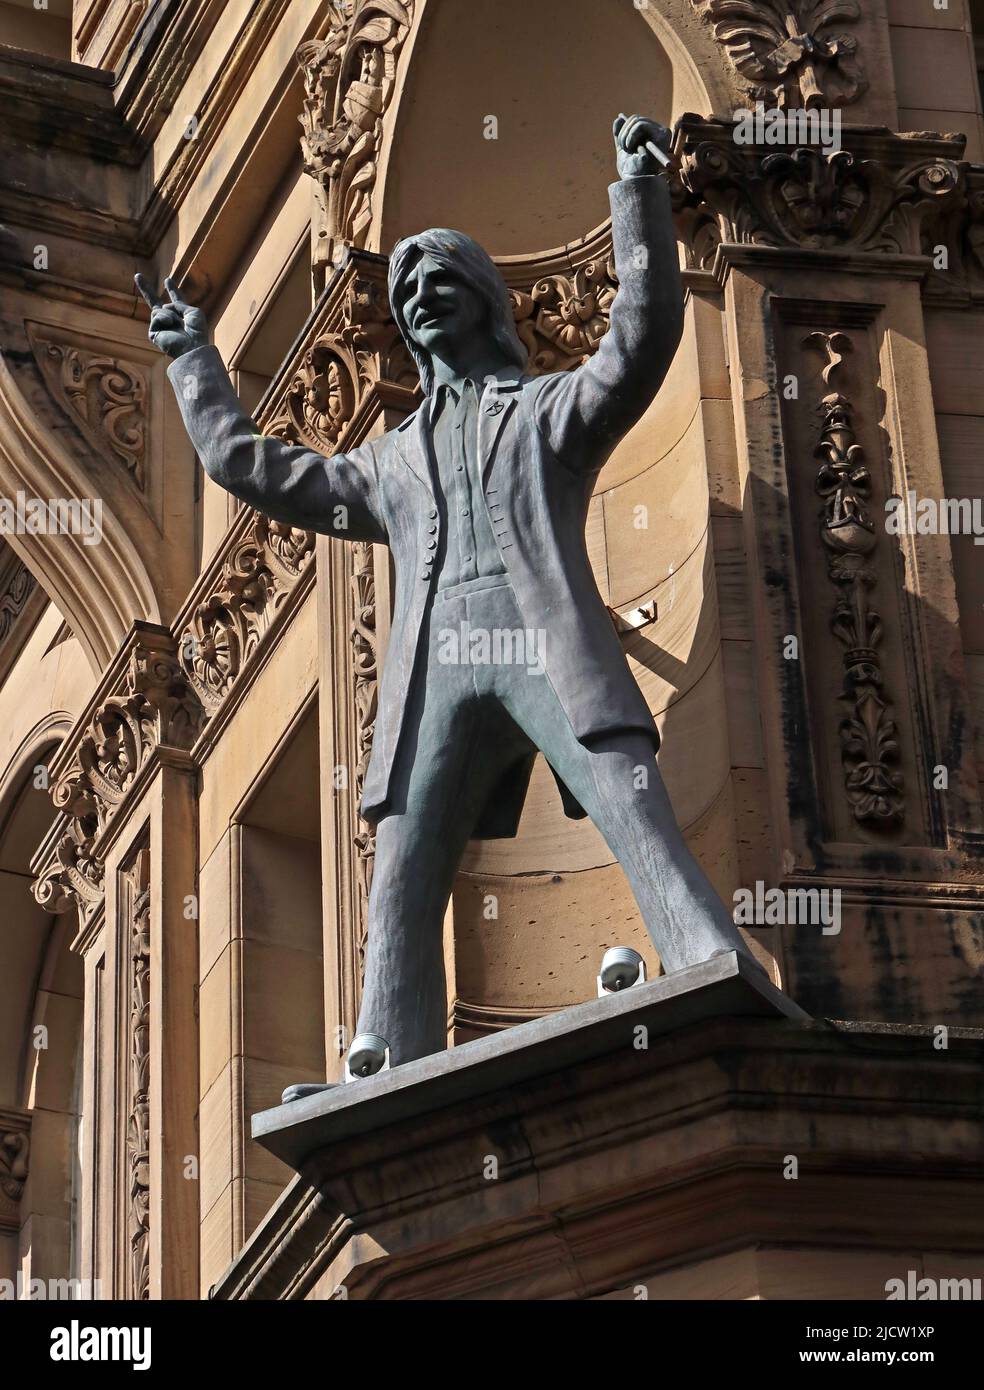 Ringo Starr - The Liverpool Beatle statue - The Fab Four, intorno all'Hard Day's Night Hotel, Central Buildings, N John St, Liverpool L2 6RR Foto Stock